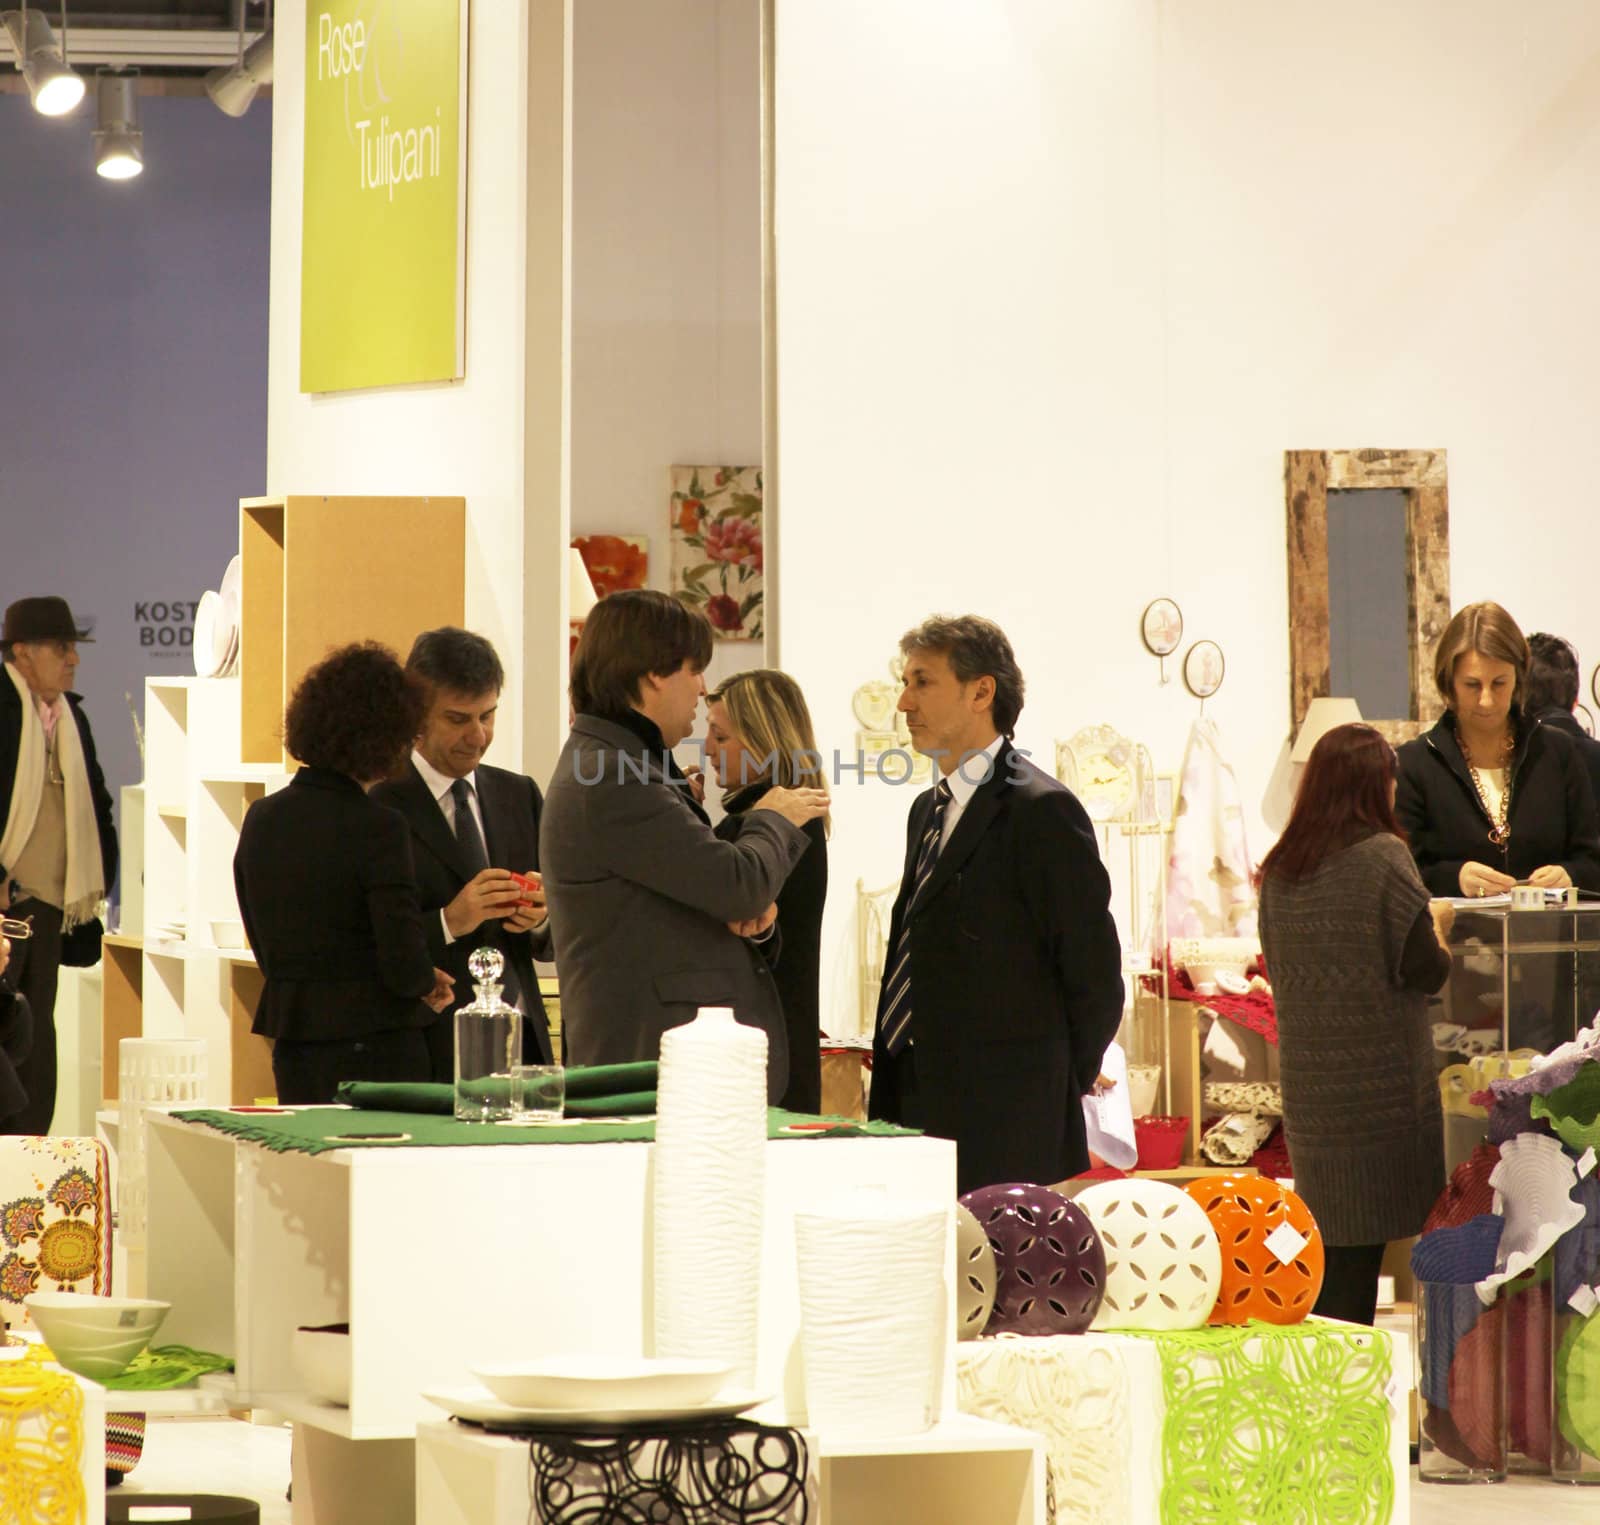 People visiting home accessories and furnishing stands at Macef, International Home Show Exhibition January 24, 2013 in Milan, Italy.